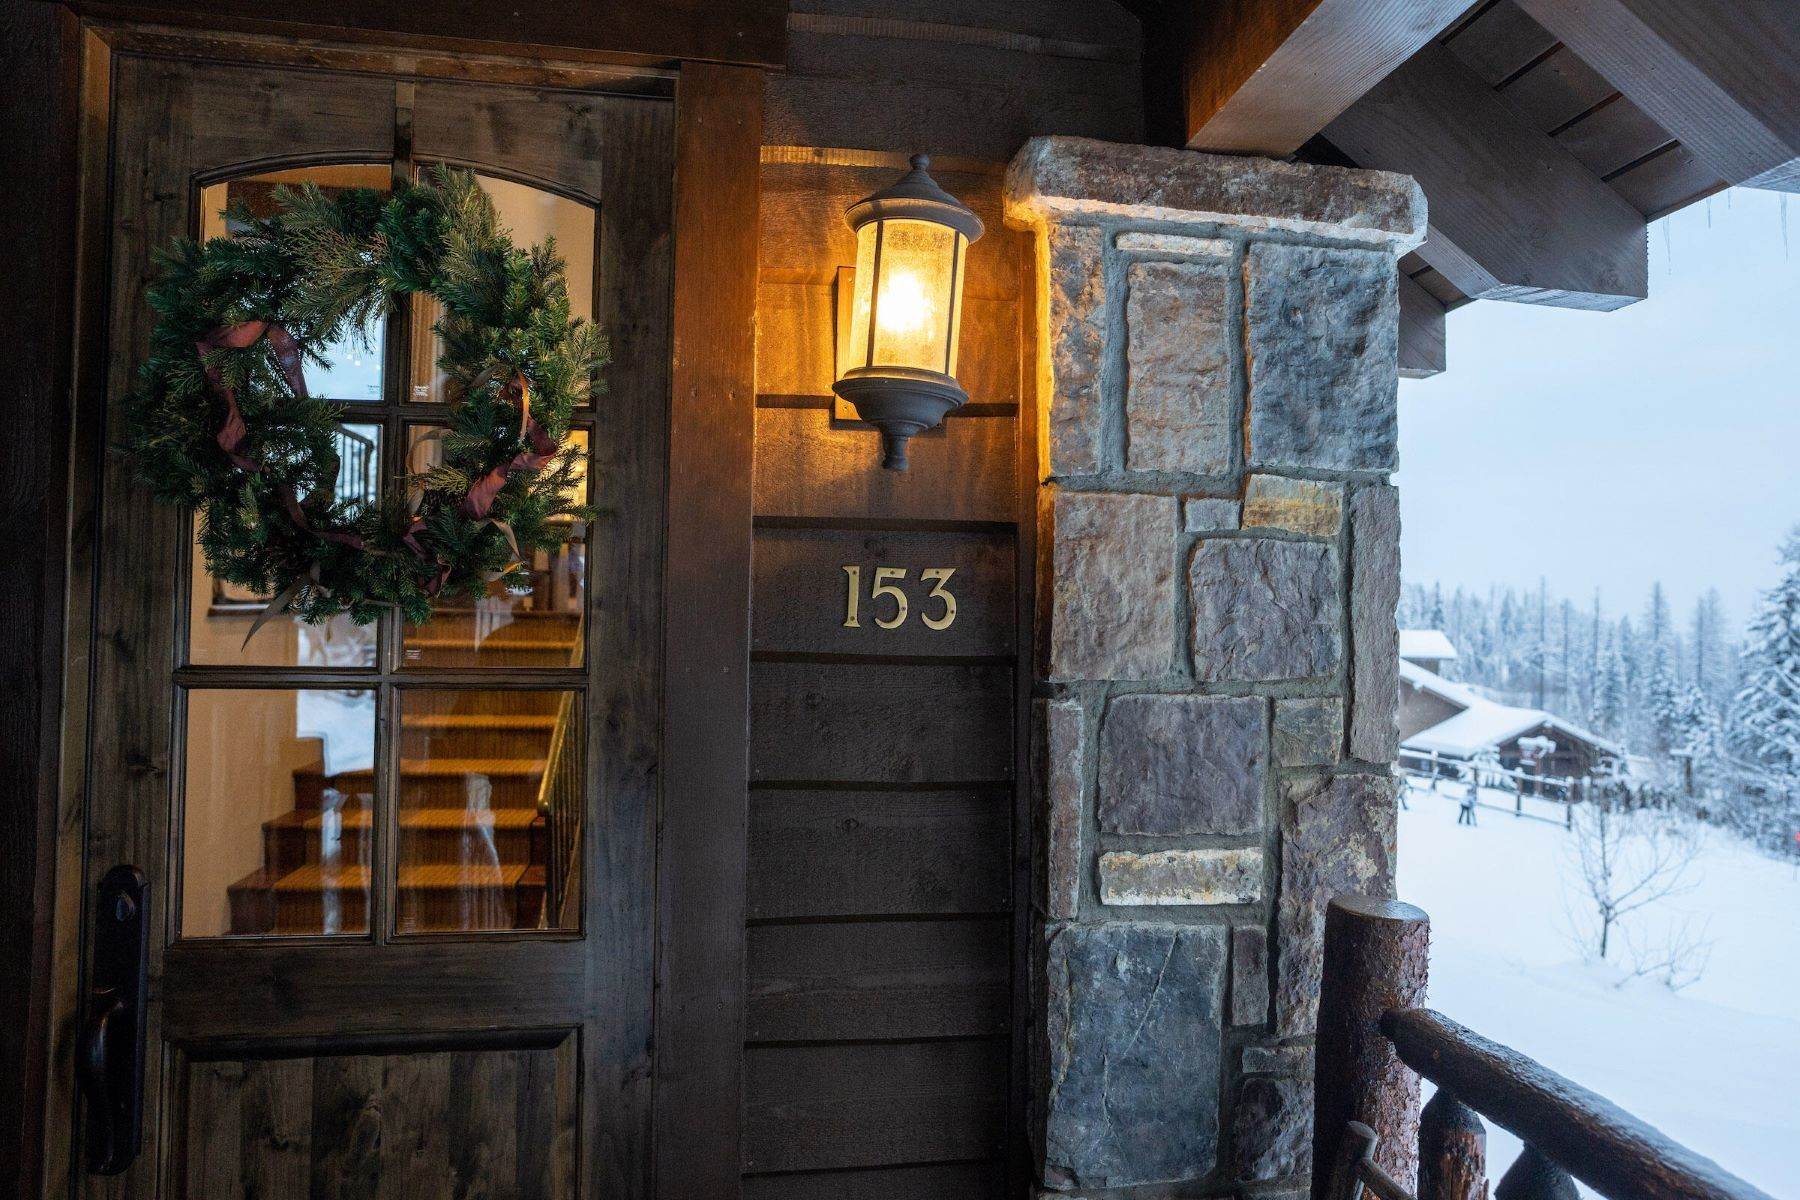 2. Condominiums for Sale at 153 Slopeside Drive, Whitefish, Montana 59937 United States